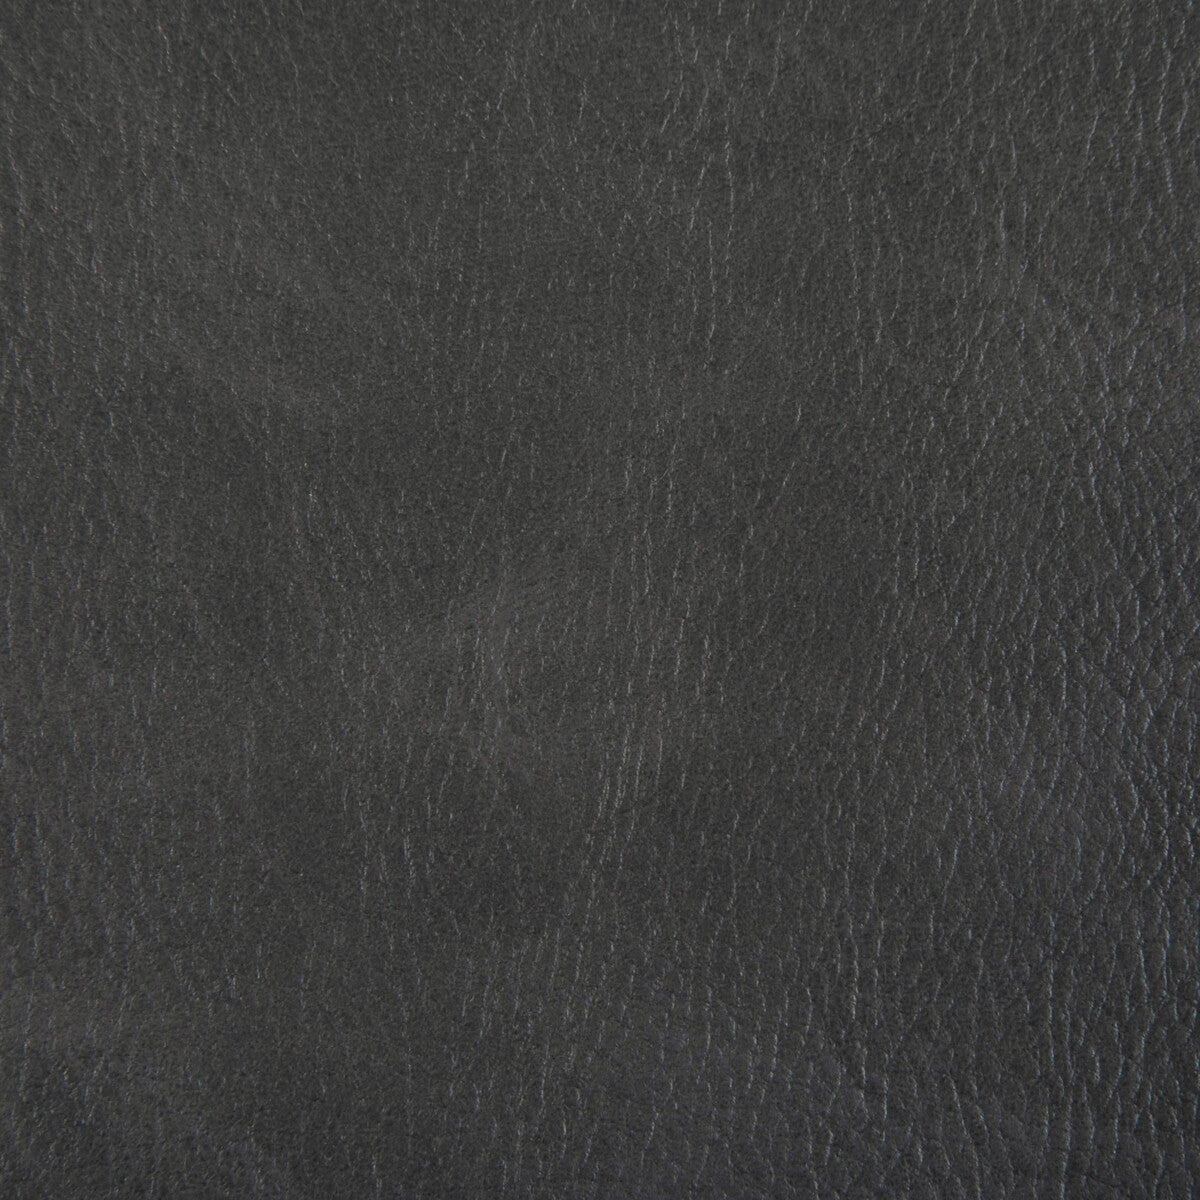 Toni fabric in slate color - pattern TONI.52.0 - by Kravet Contract